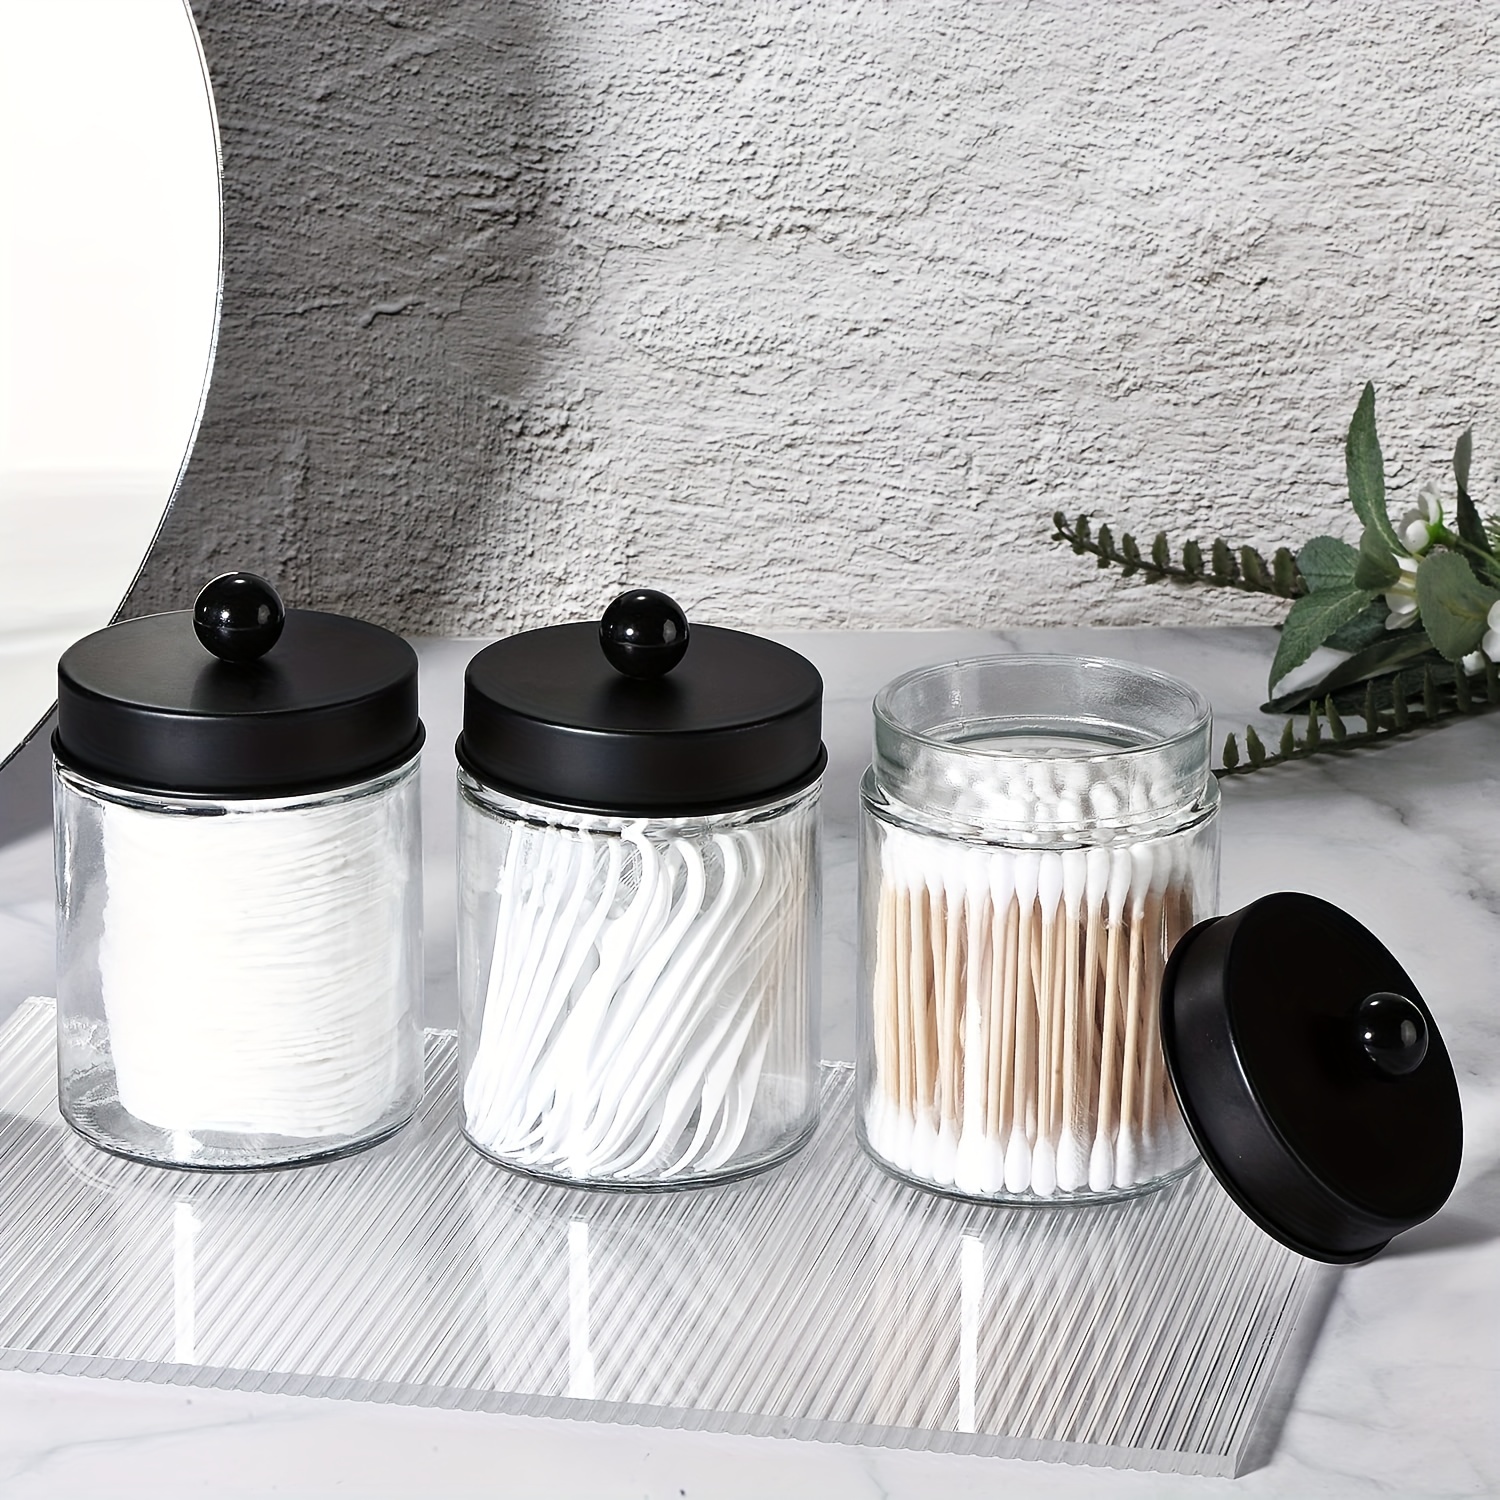 Glass Apothecary Jars With Lids - Set Of 3 - Small Glass Jars For Bathroom  Storage / Qtip